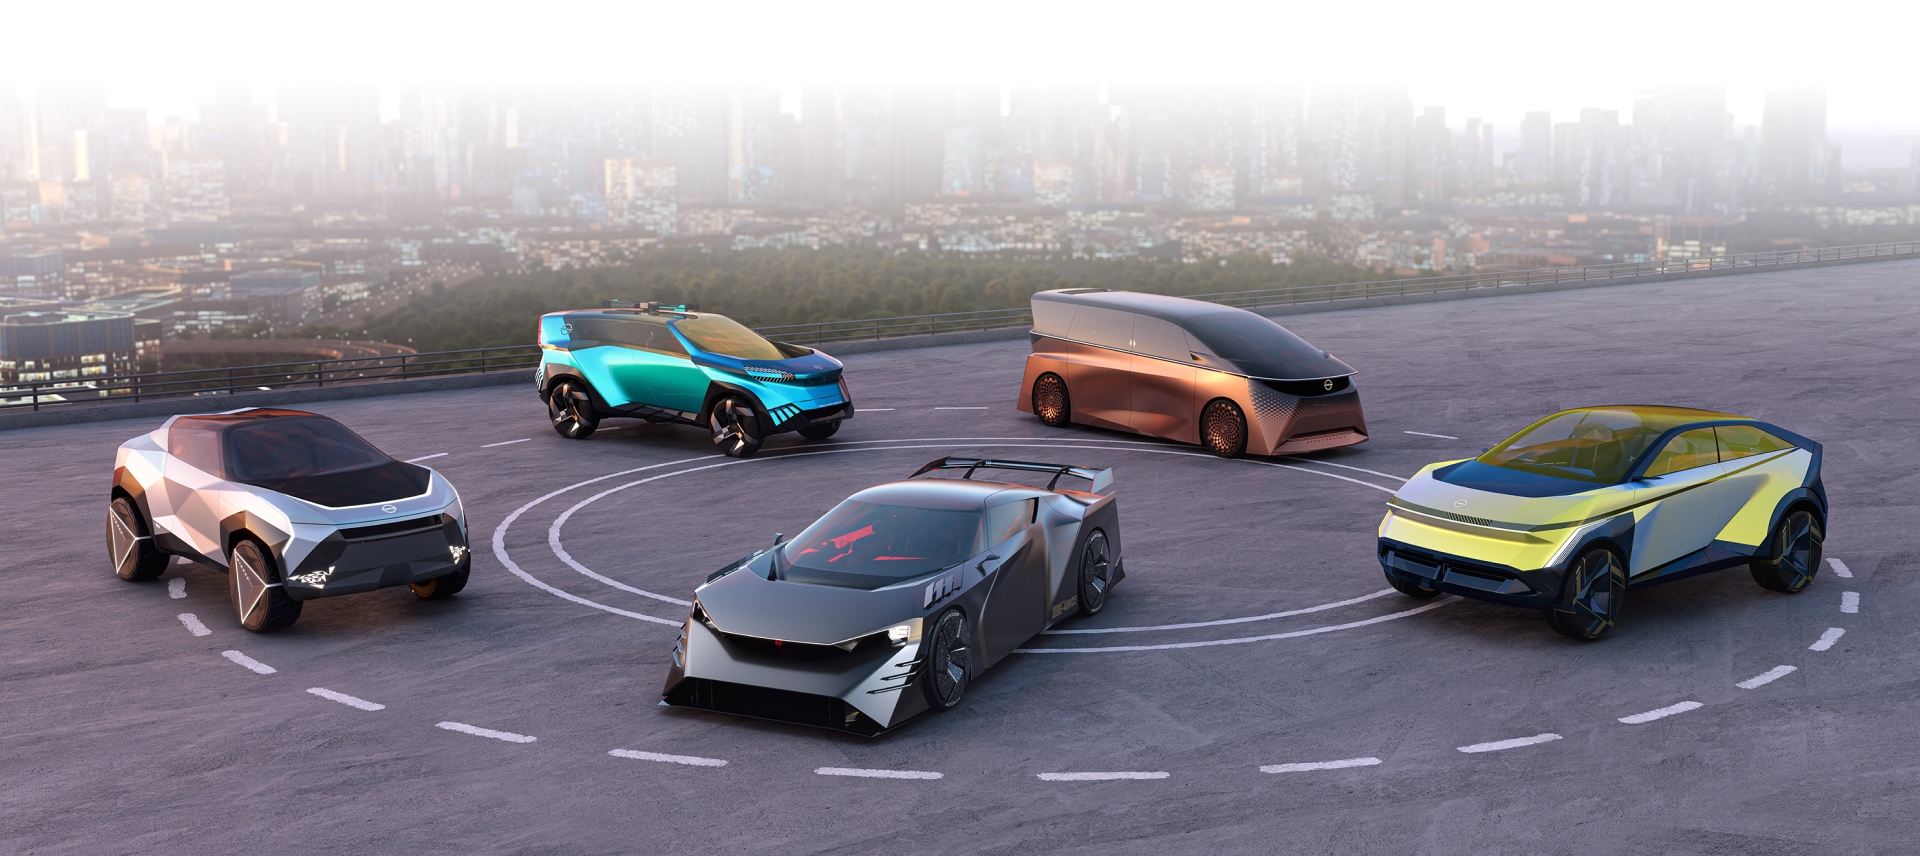 Nissan future cars and concept vehicles lineup